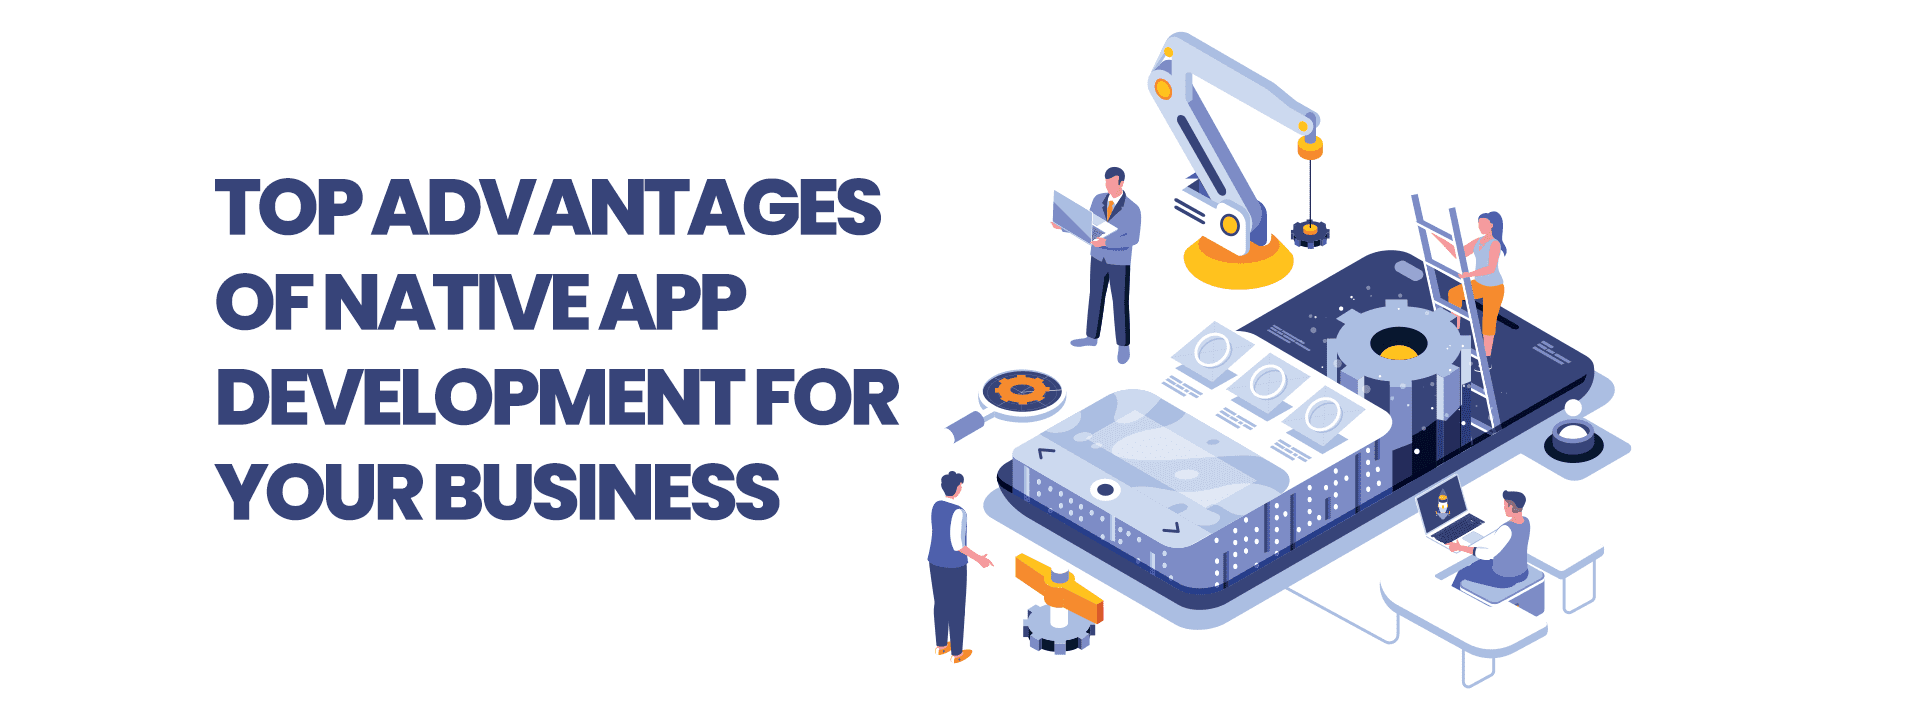 NATIVE APP DEVELOPMENT FOR YOUR BUSINESS